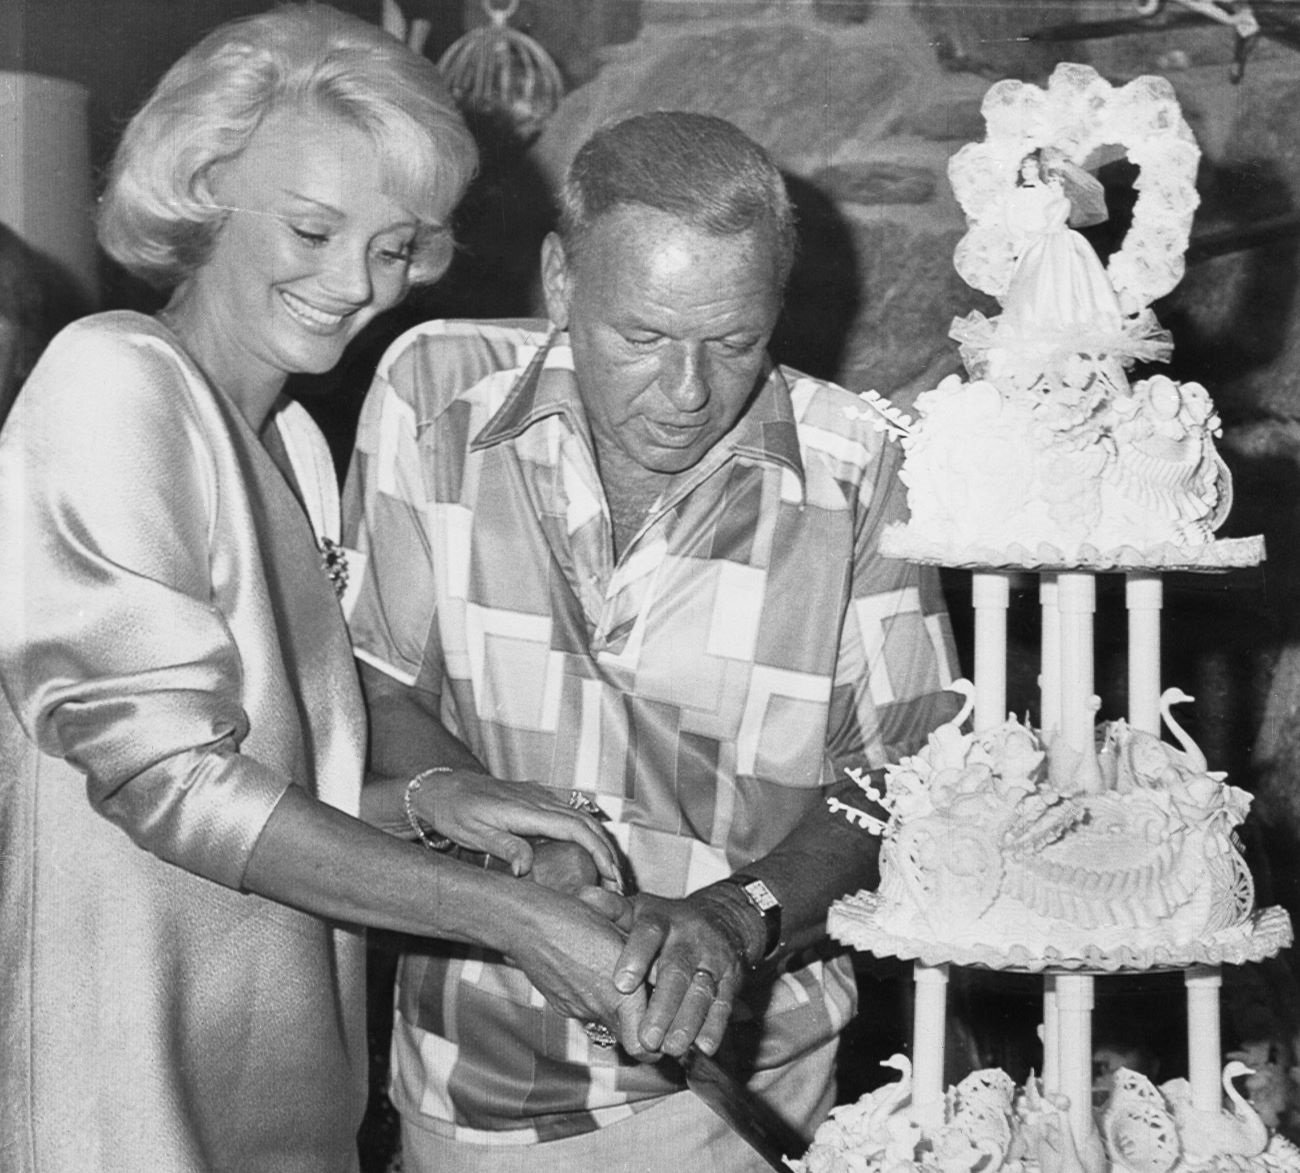 A black and white photo of Frank Sinatra and Barbara Sinatra cutting into their wedding cake together.